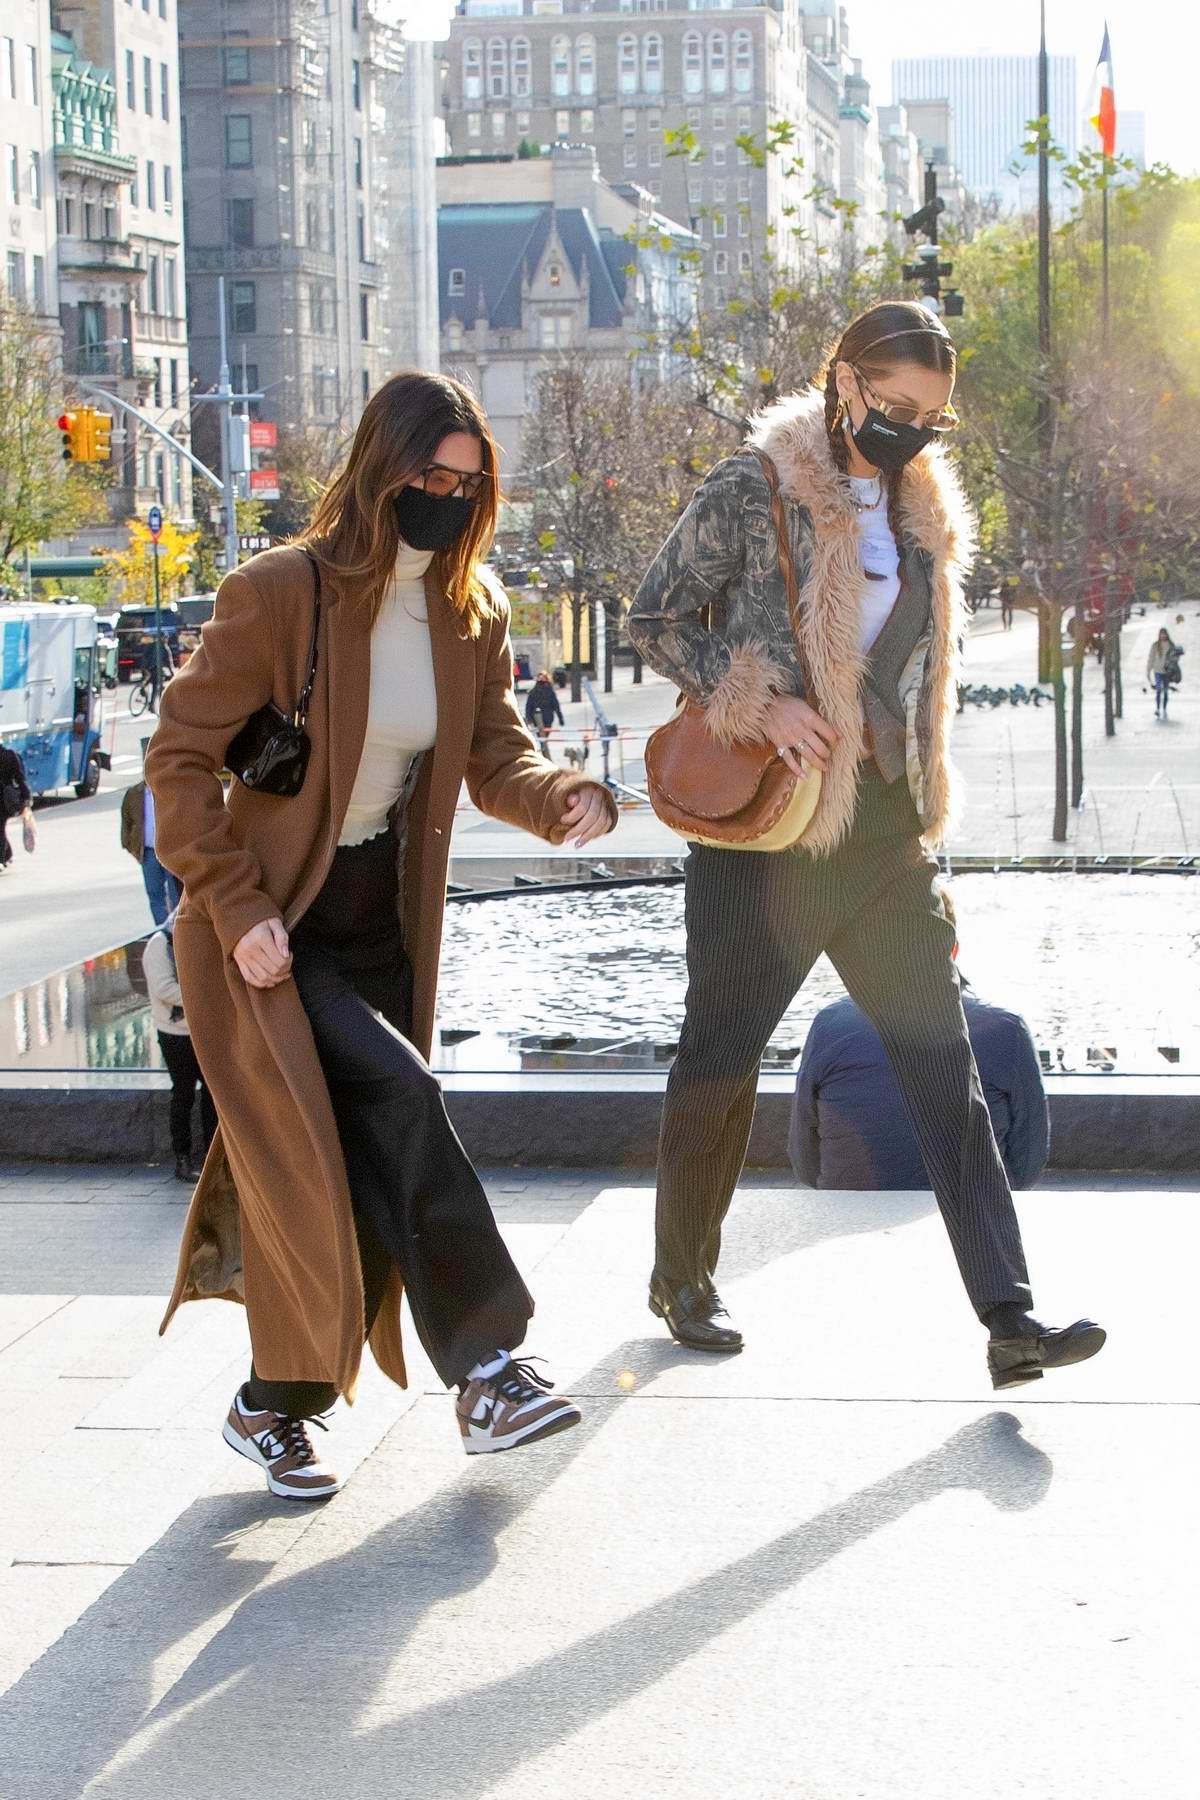 kendall-jenner-looks-chic-in-a-beige-overcoat-as-she-grabs-lunch-with-bella-hadid-in-new-york-...jpg